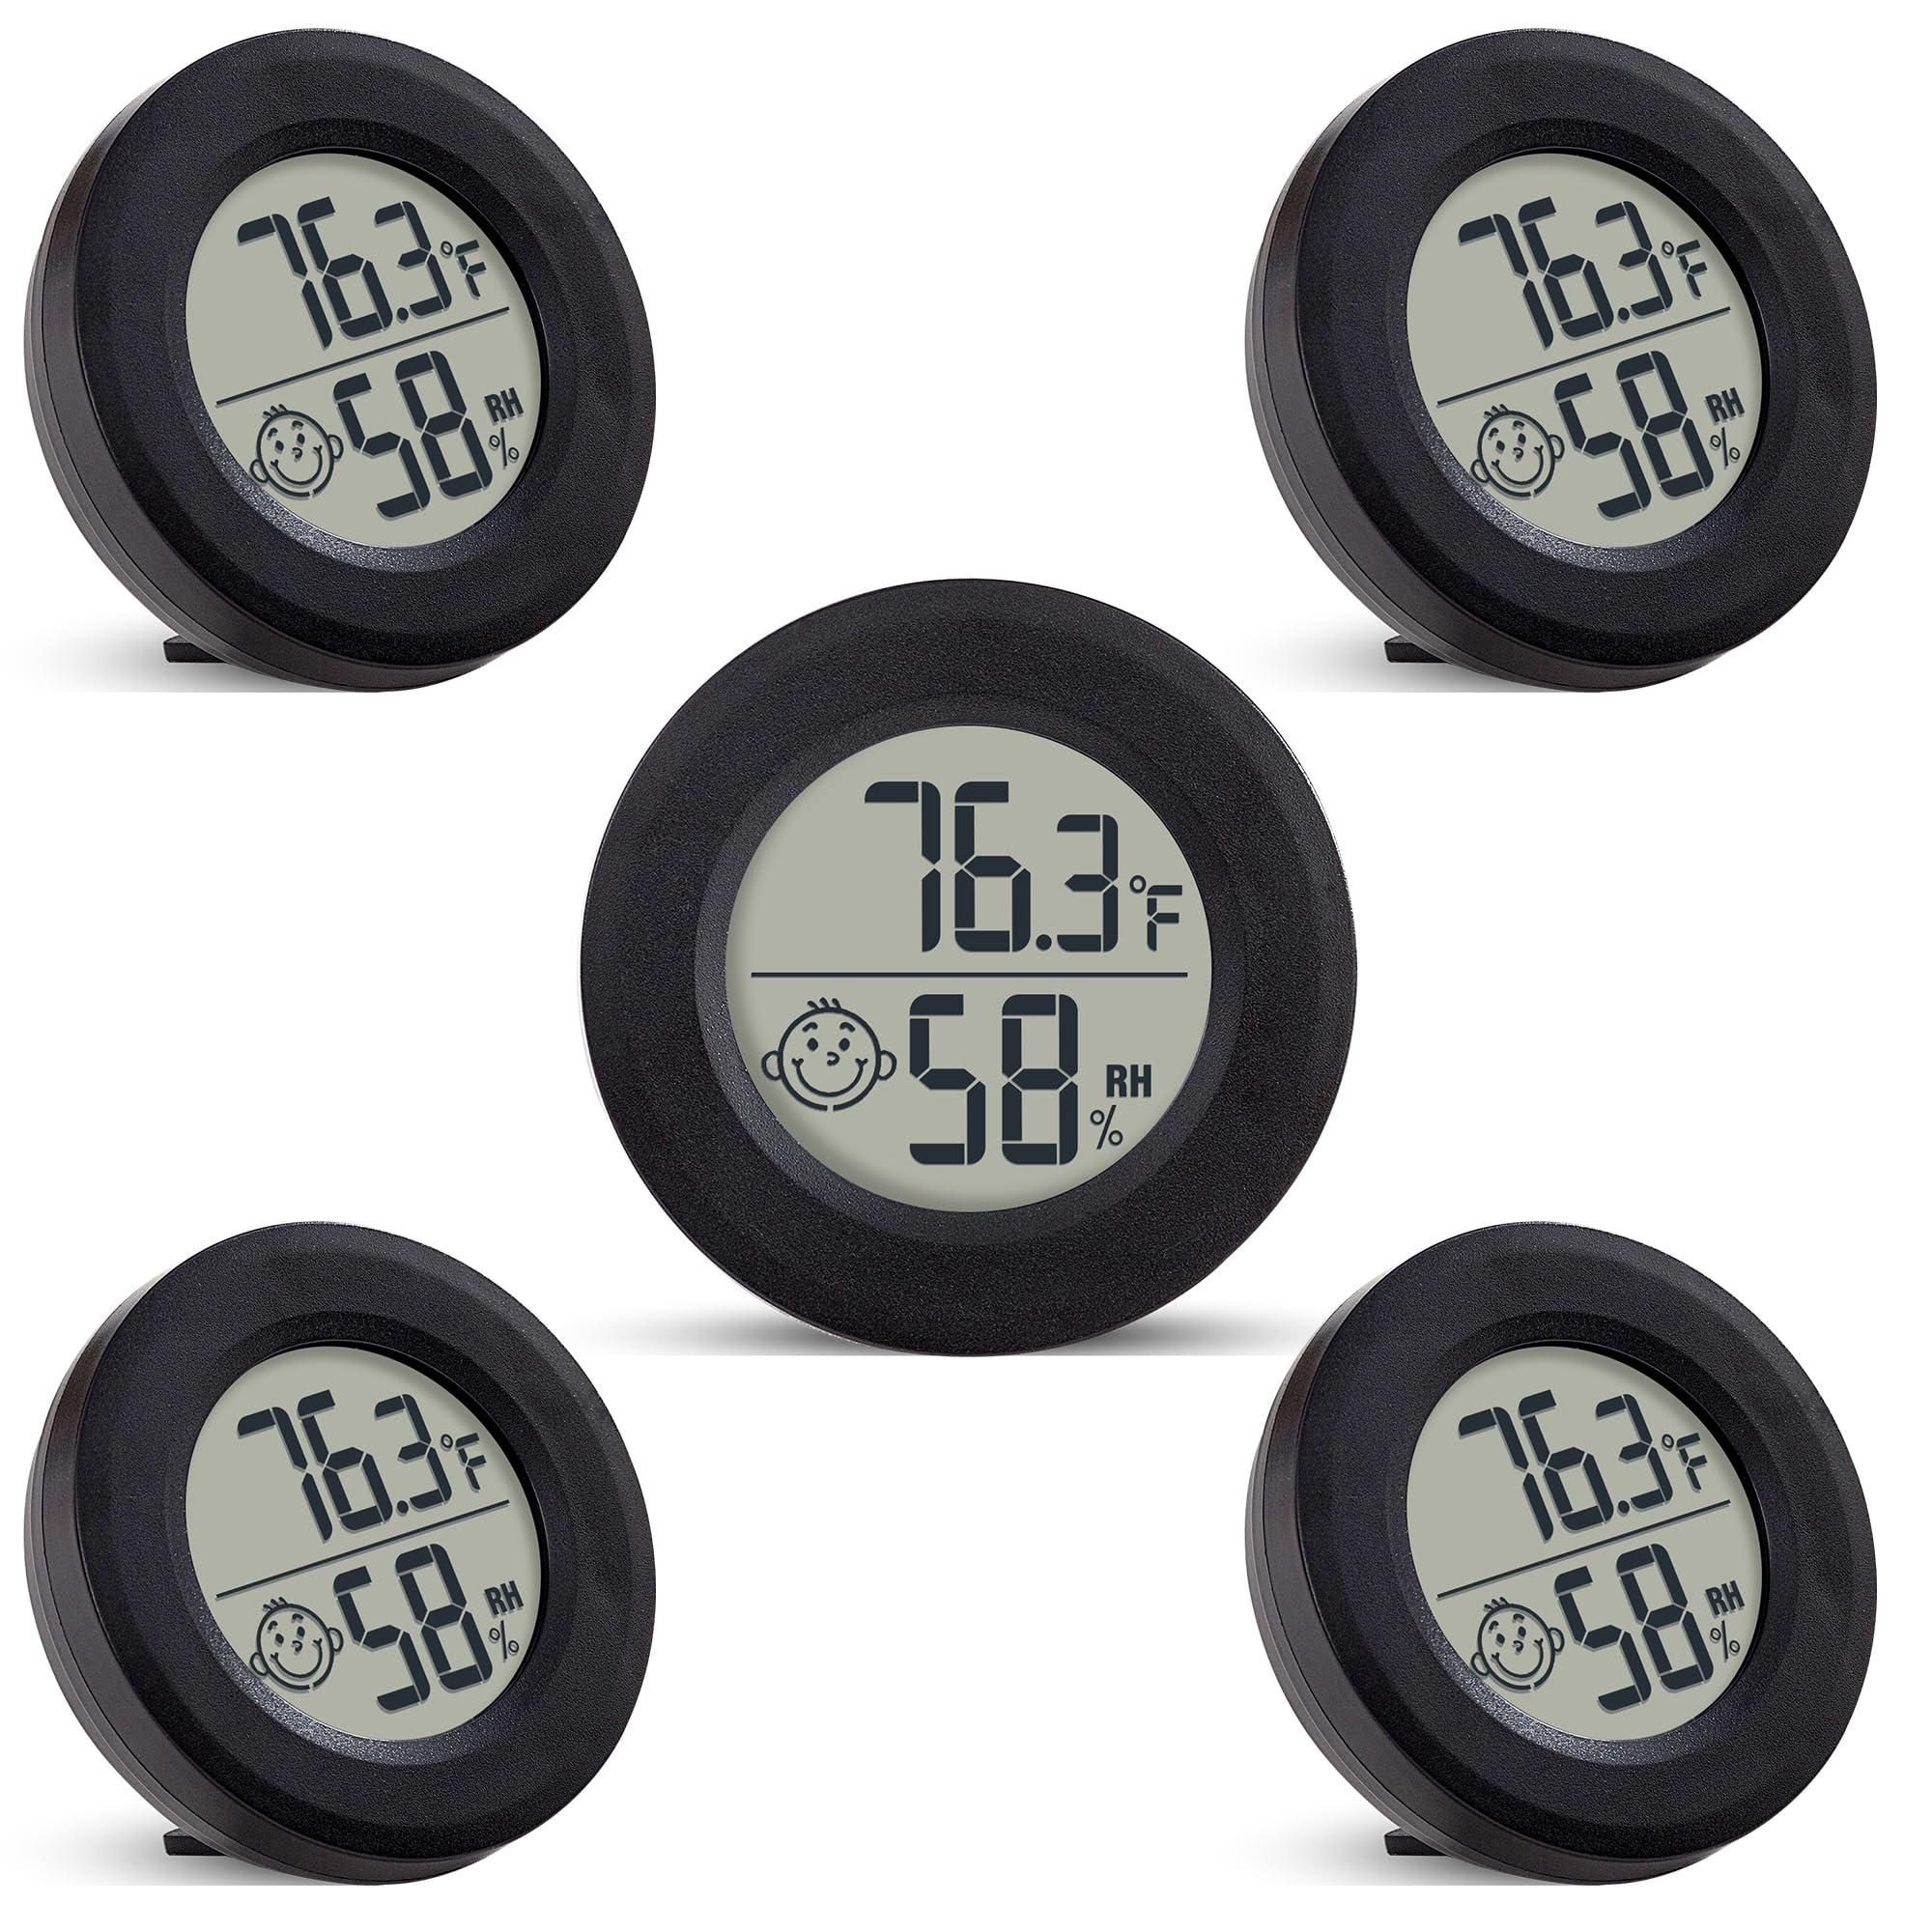 5 PCS Mini Small Digital Hygrometer,Gauge Meter Hygrometer with C/F Buttons and ON/Off,Indoor Humidity Gauge Monitor with Temperature Meter Sensor(Black) (Black-5PC)